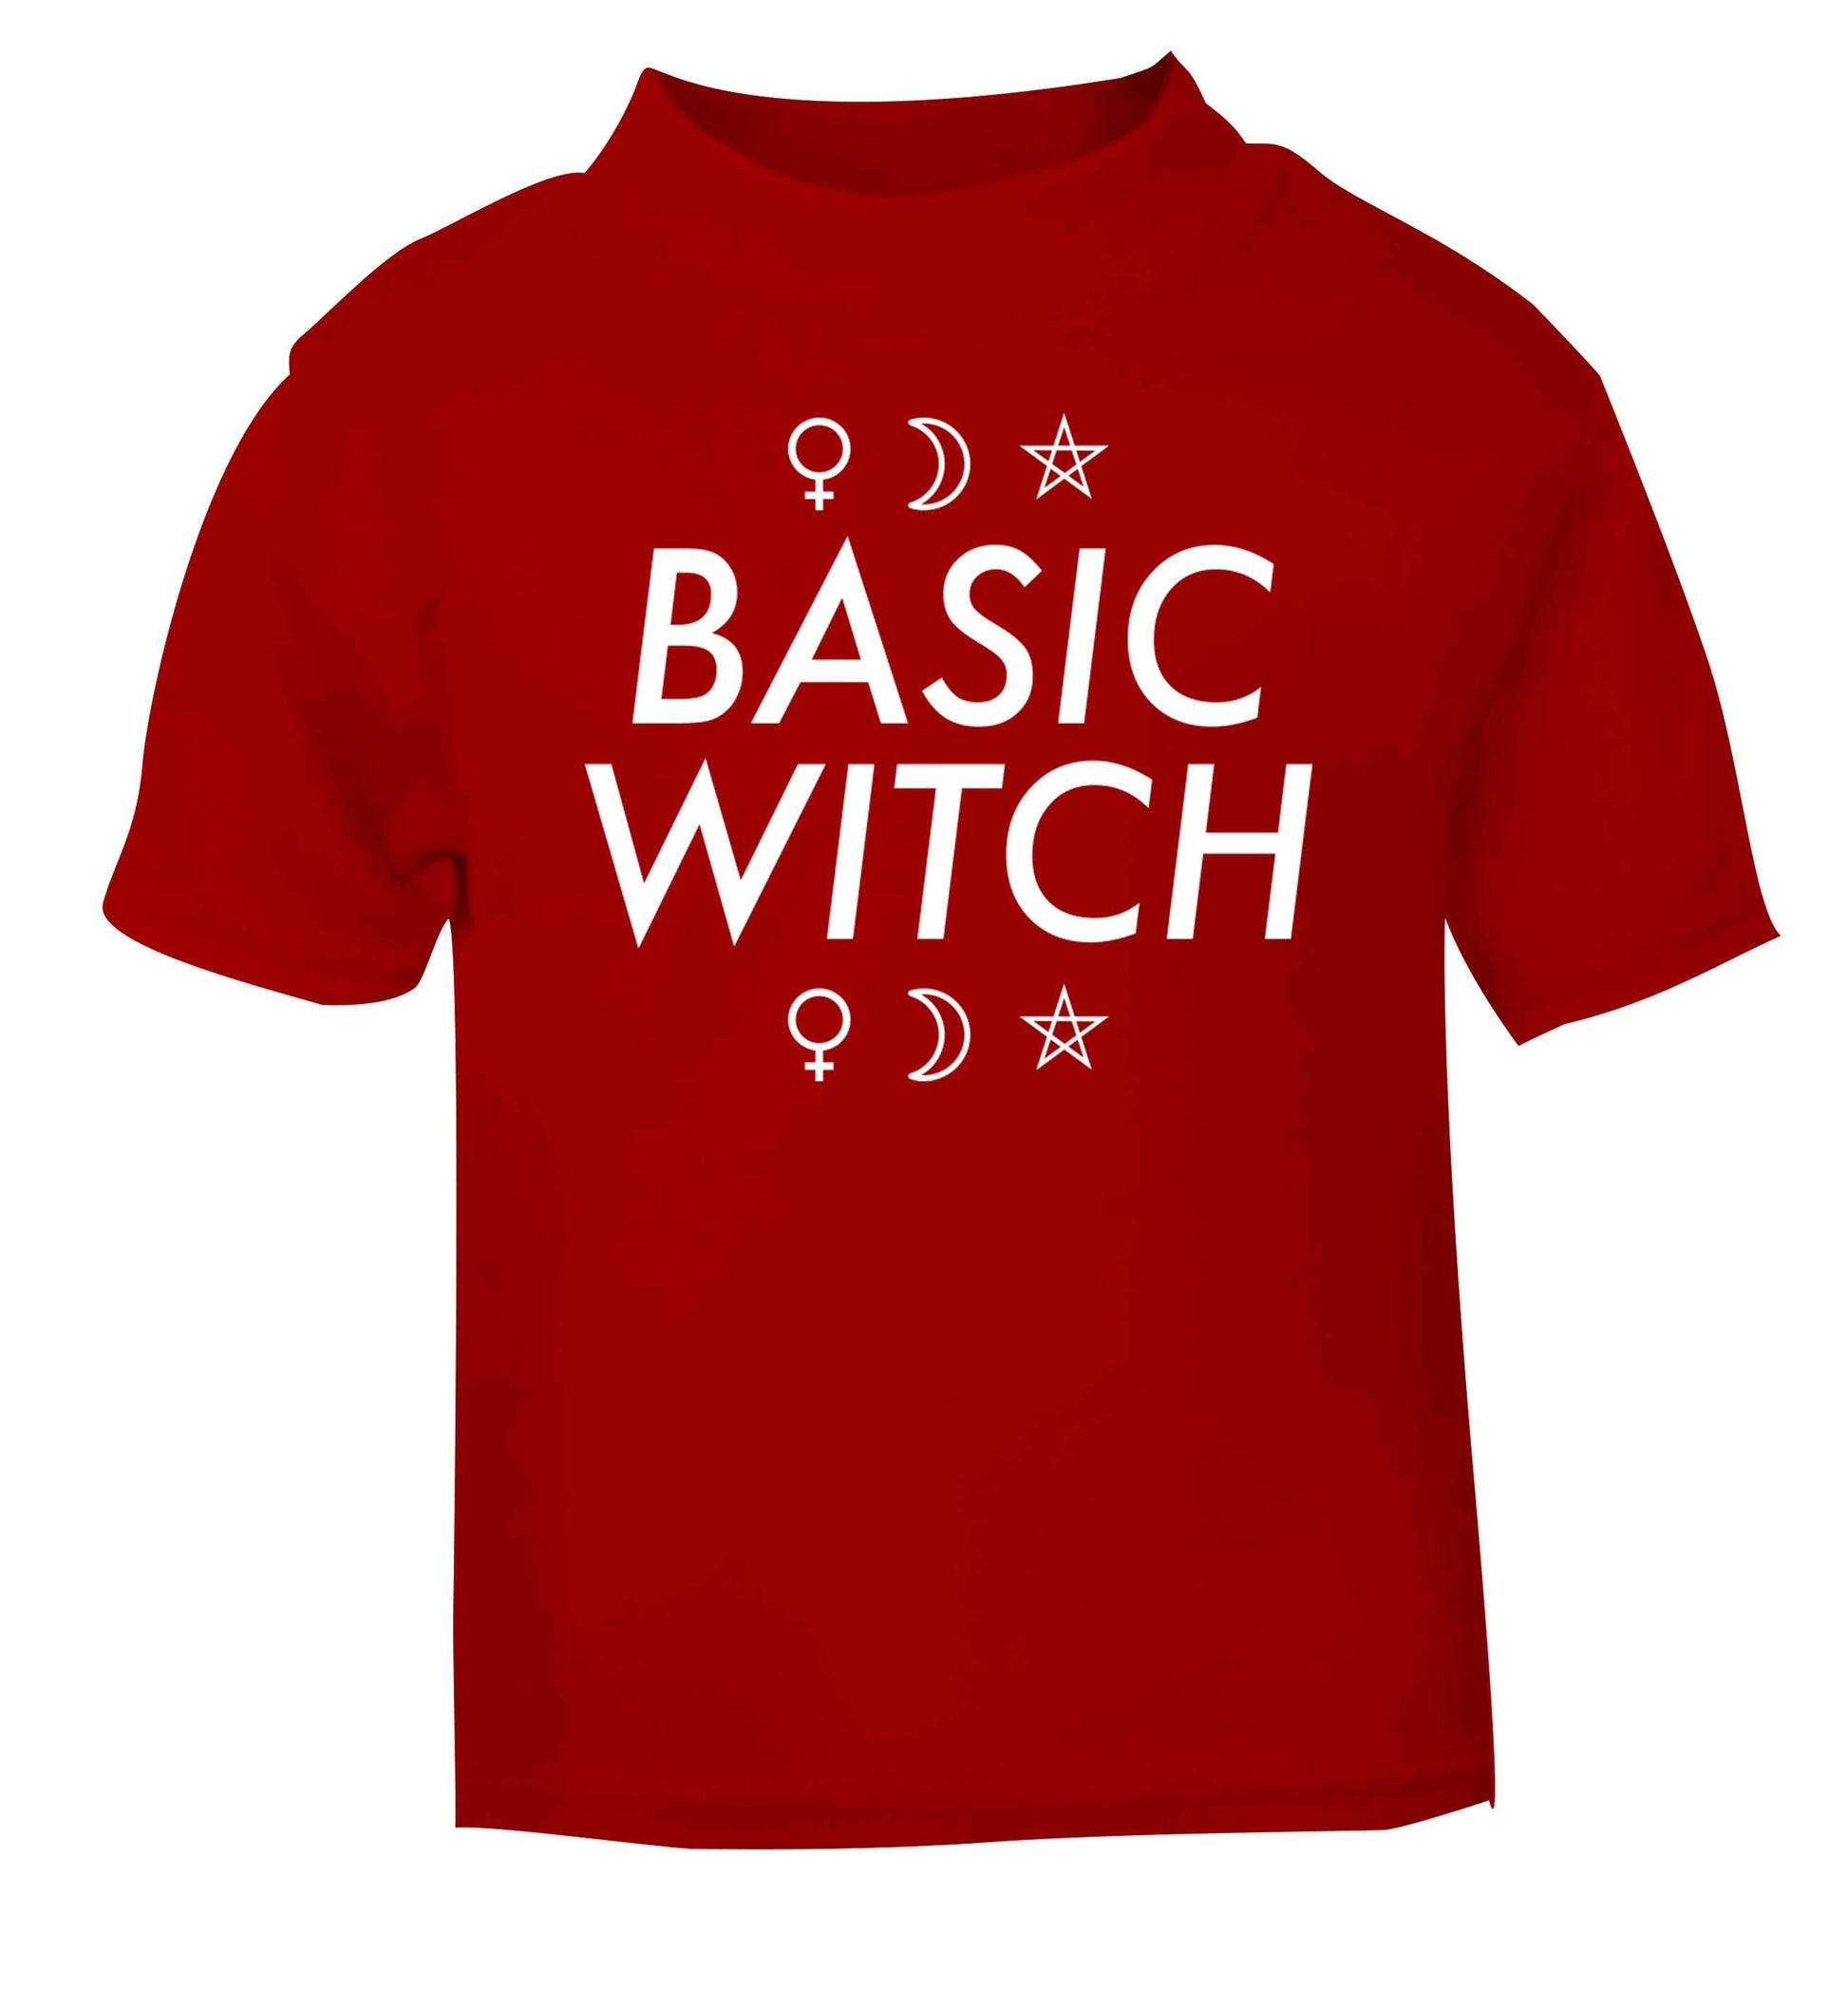 Basic witch 1 red baby toddler Tshirt 2 Years